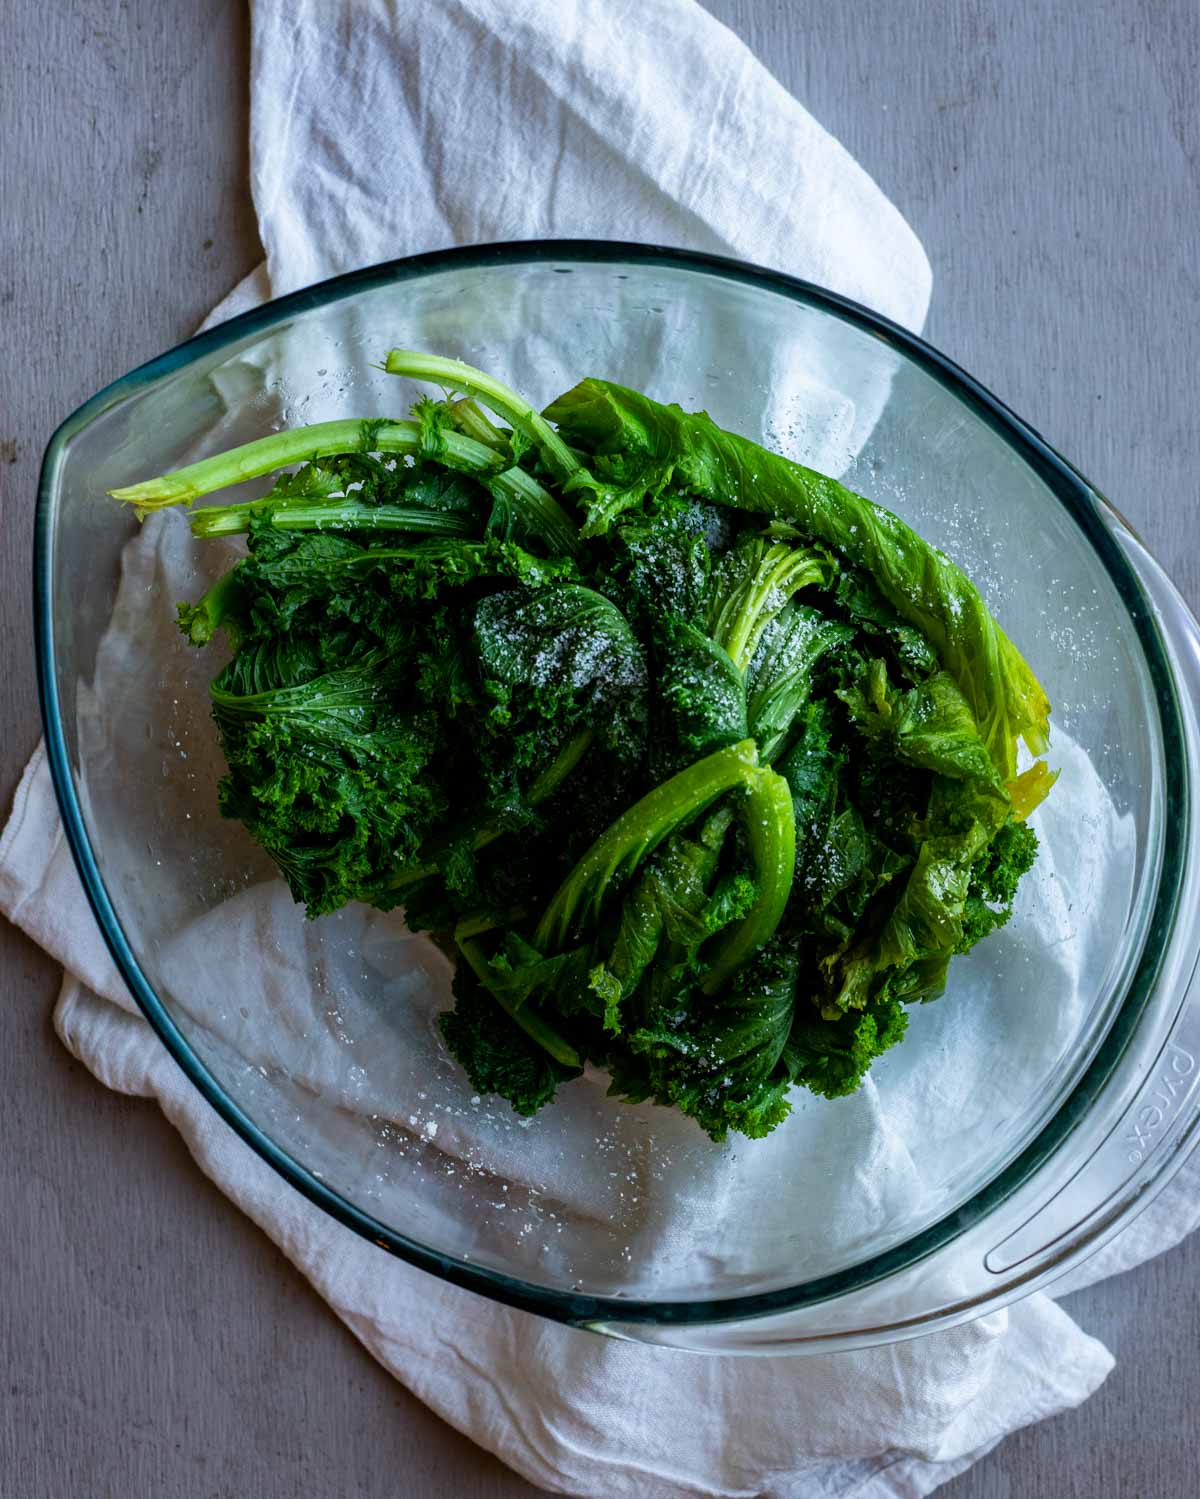 Blanched mustard greens resting in a large glass bowl.